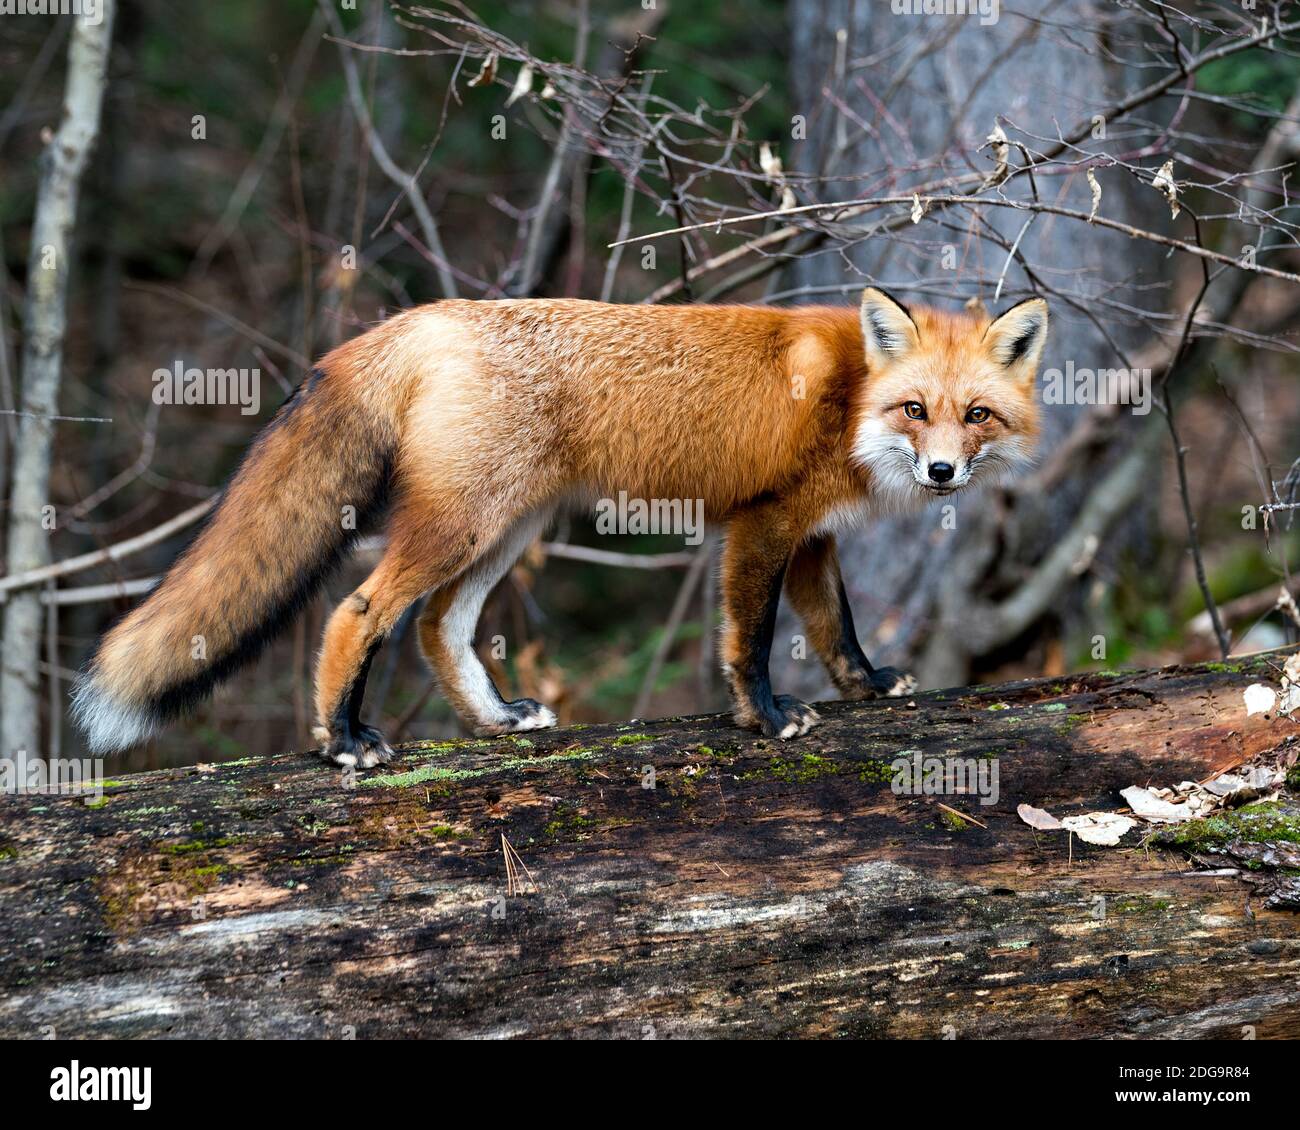 Red fox close-up profile view standing on a big moss log with a forest background in its environment and habitat displaying fox tail. Stock Photo